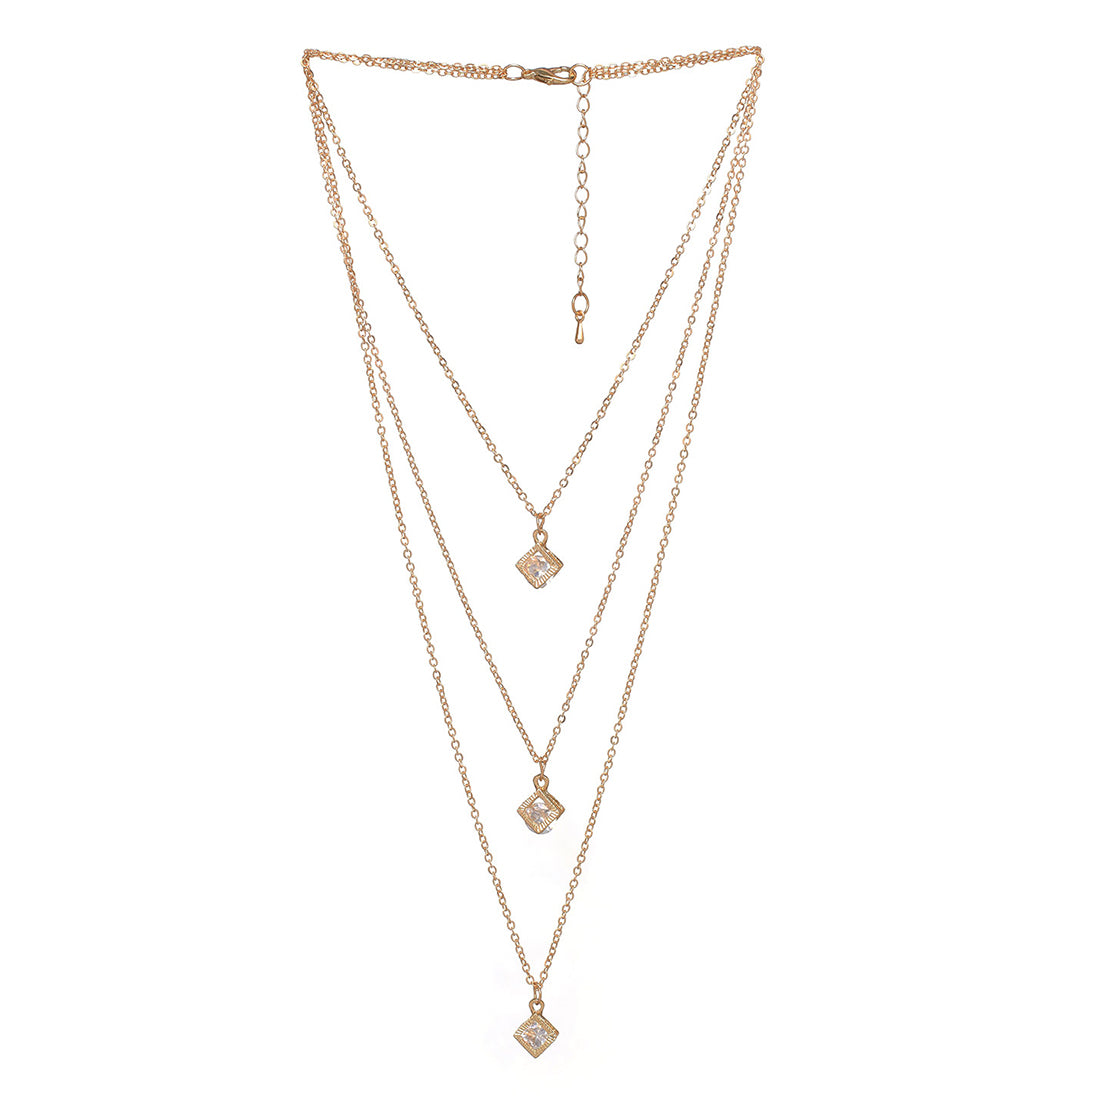 Triple Layer Gold Necklace - 3D Cube with Diamante